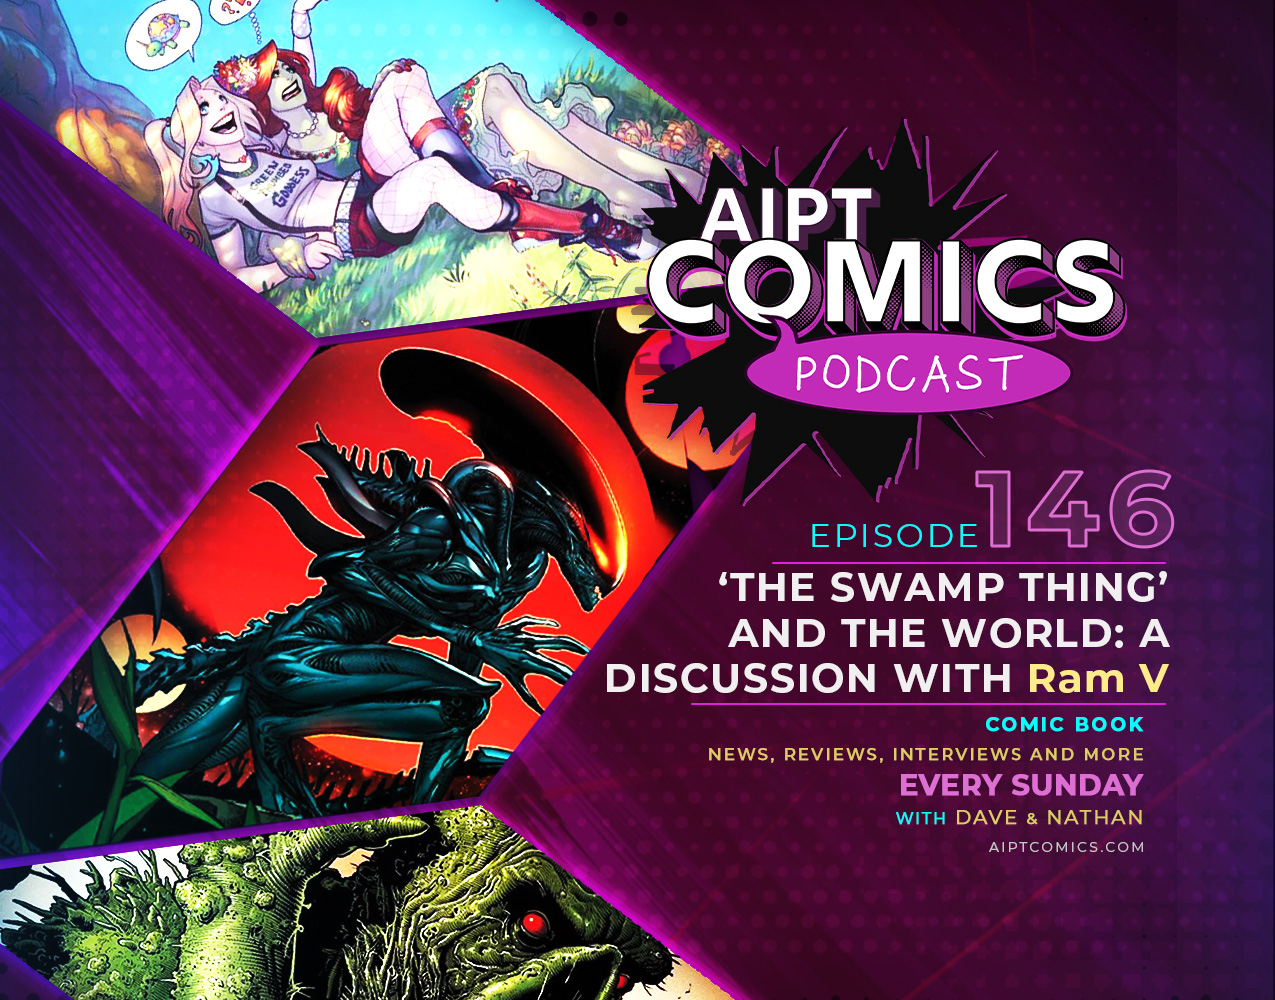 AIPT Comics Podcast episode 146: 'The Swamp Thing' and the world: A discussion with Ram V